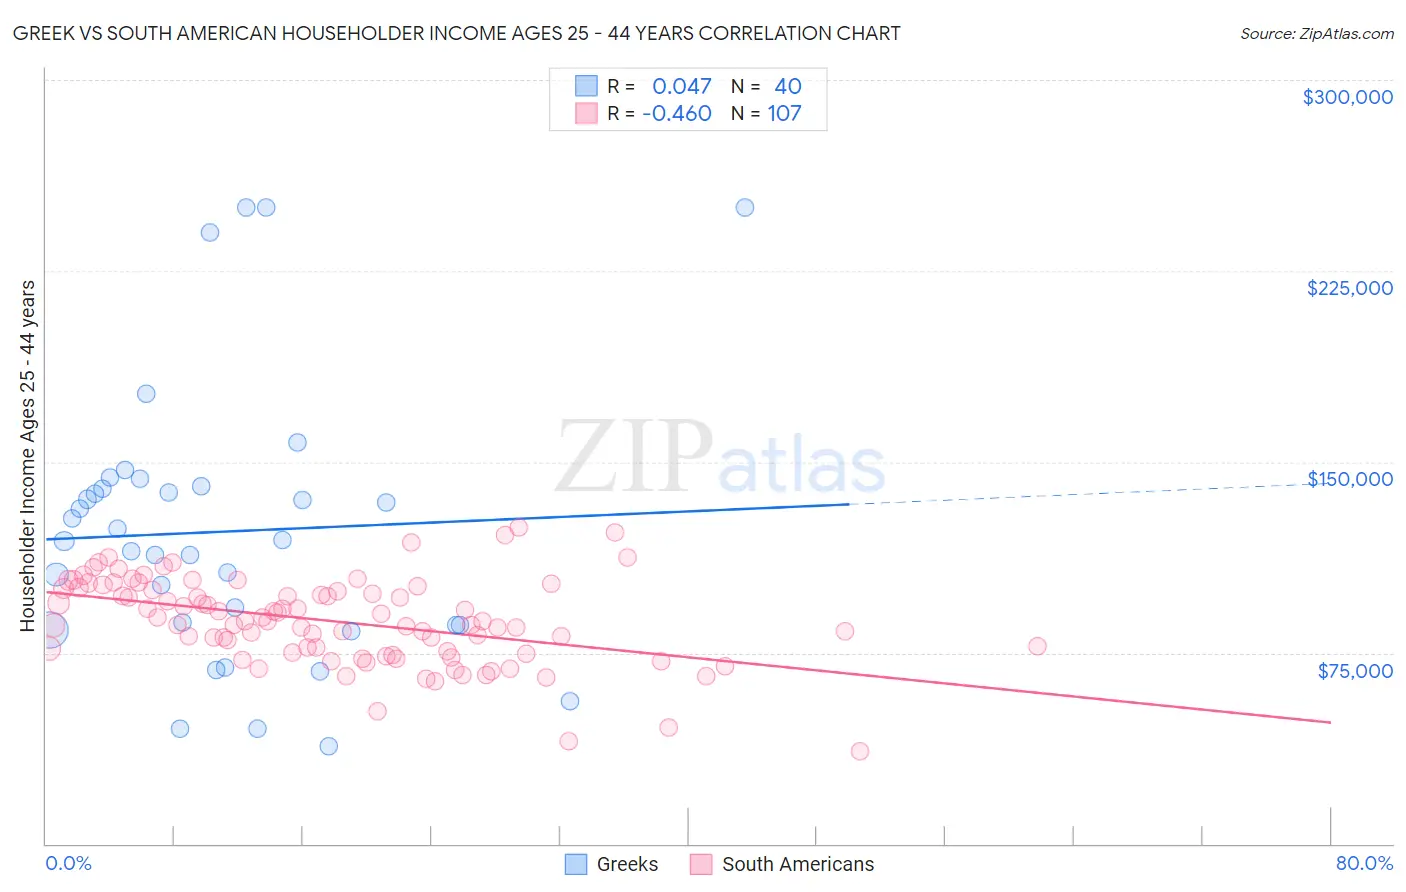 Greek vs South American Householder Income Ages 25 - 44 years